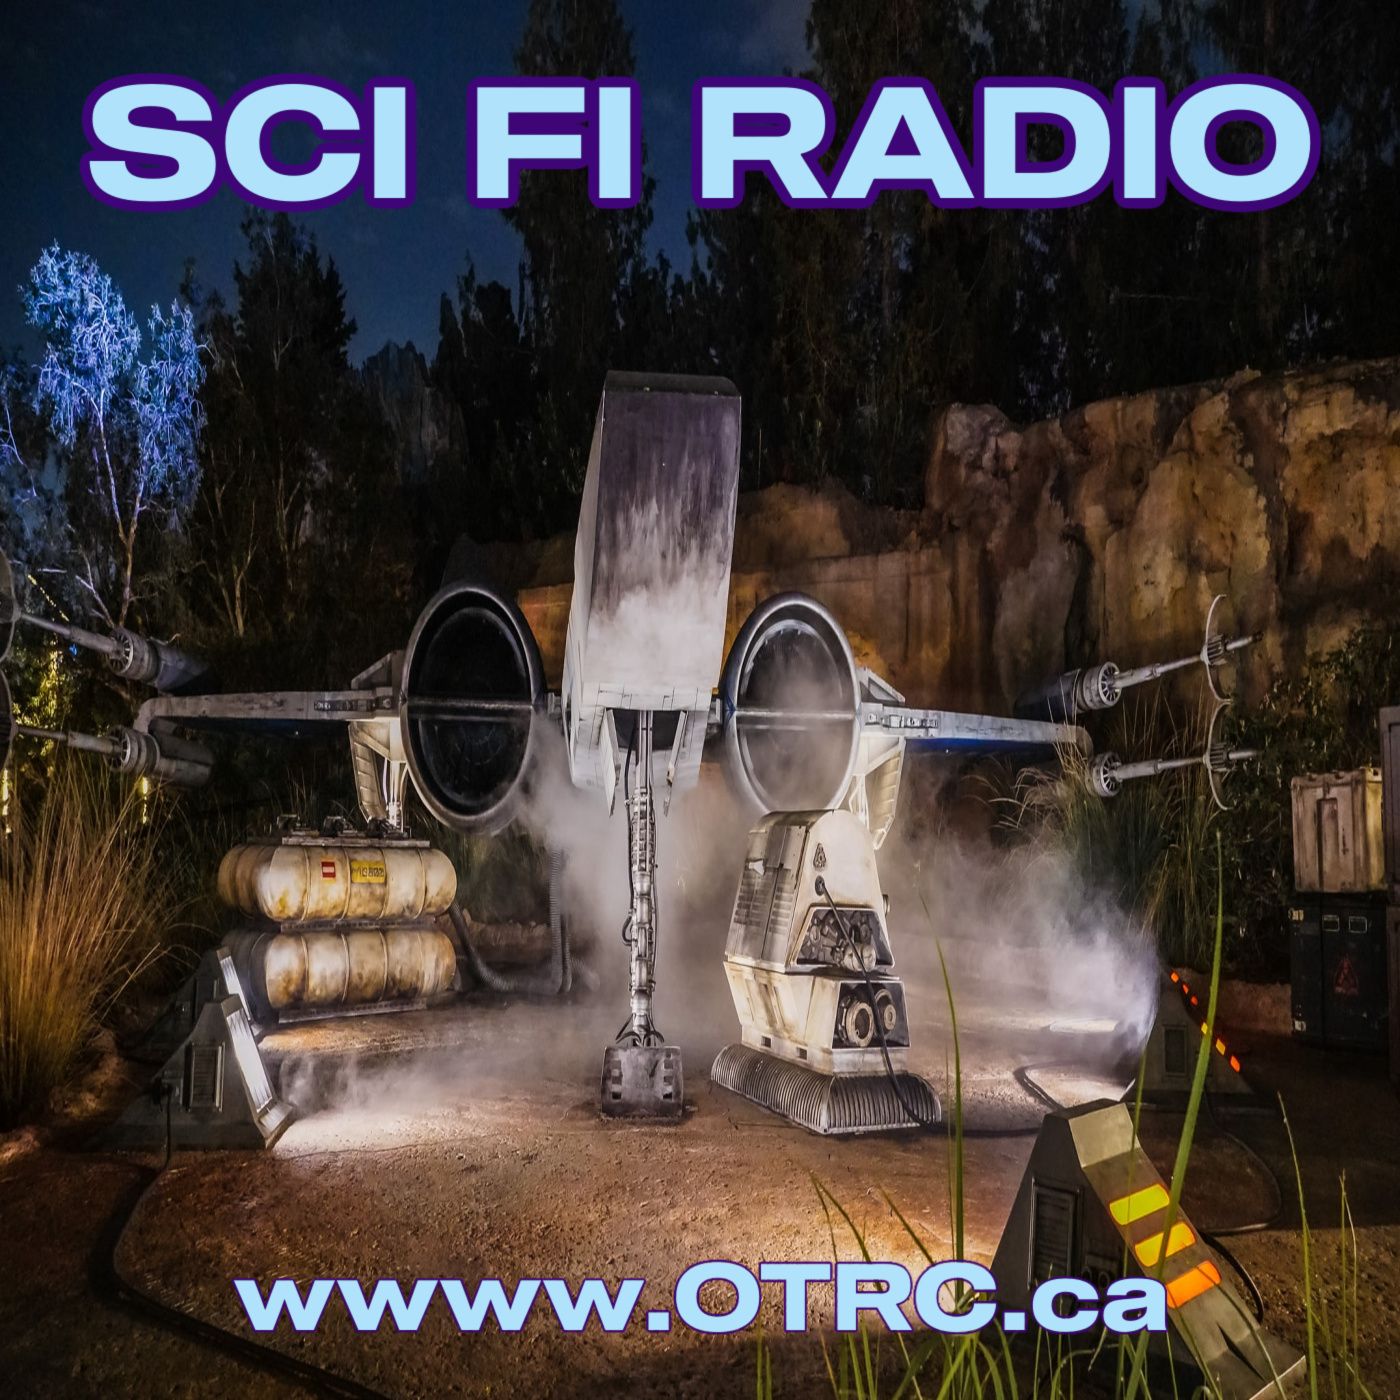 Sci Fi Radio - Voices Lost in Calling